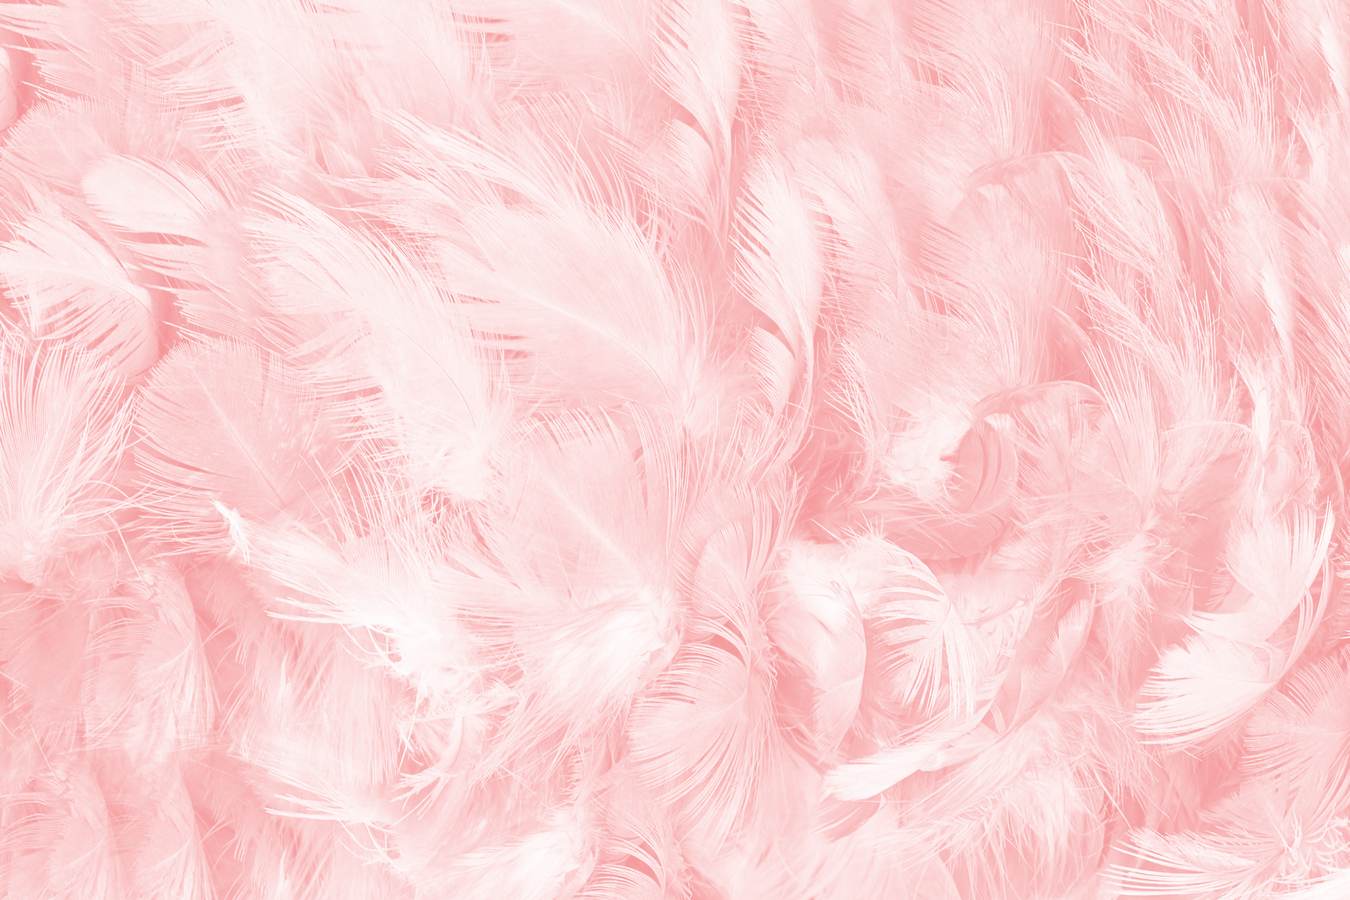 Wallpaper, Pale Pink Feathers